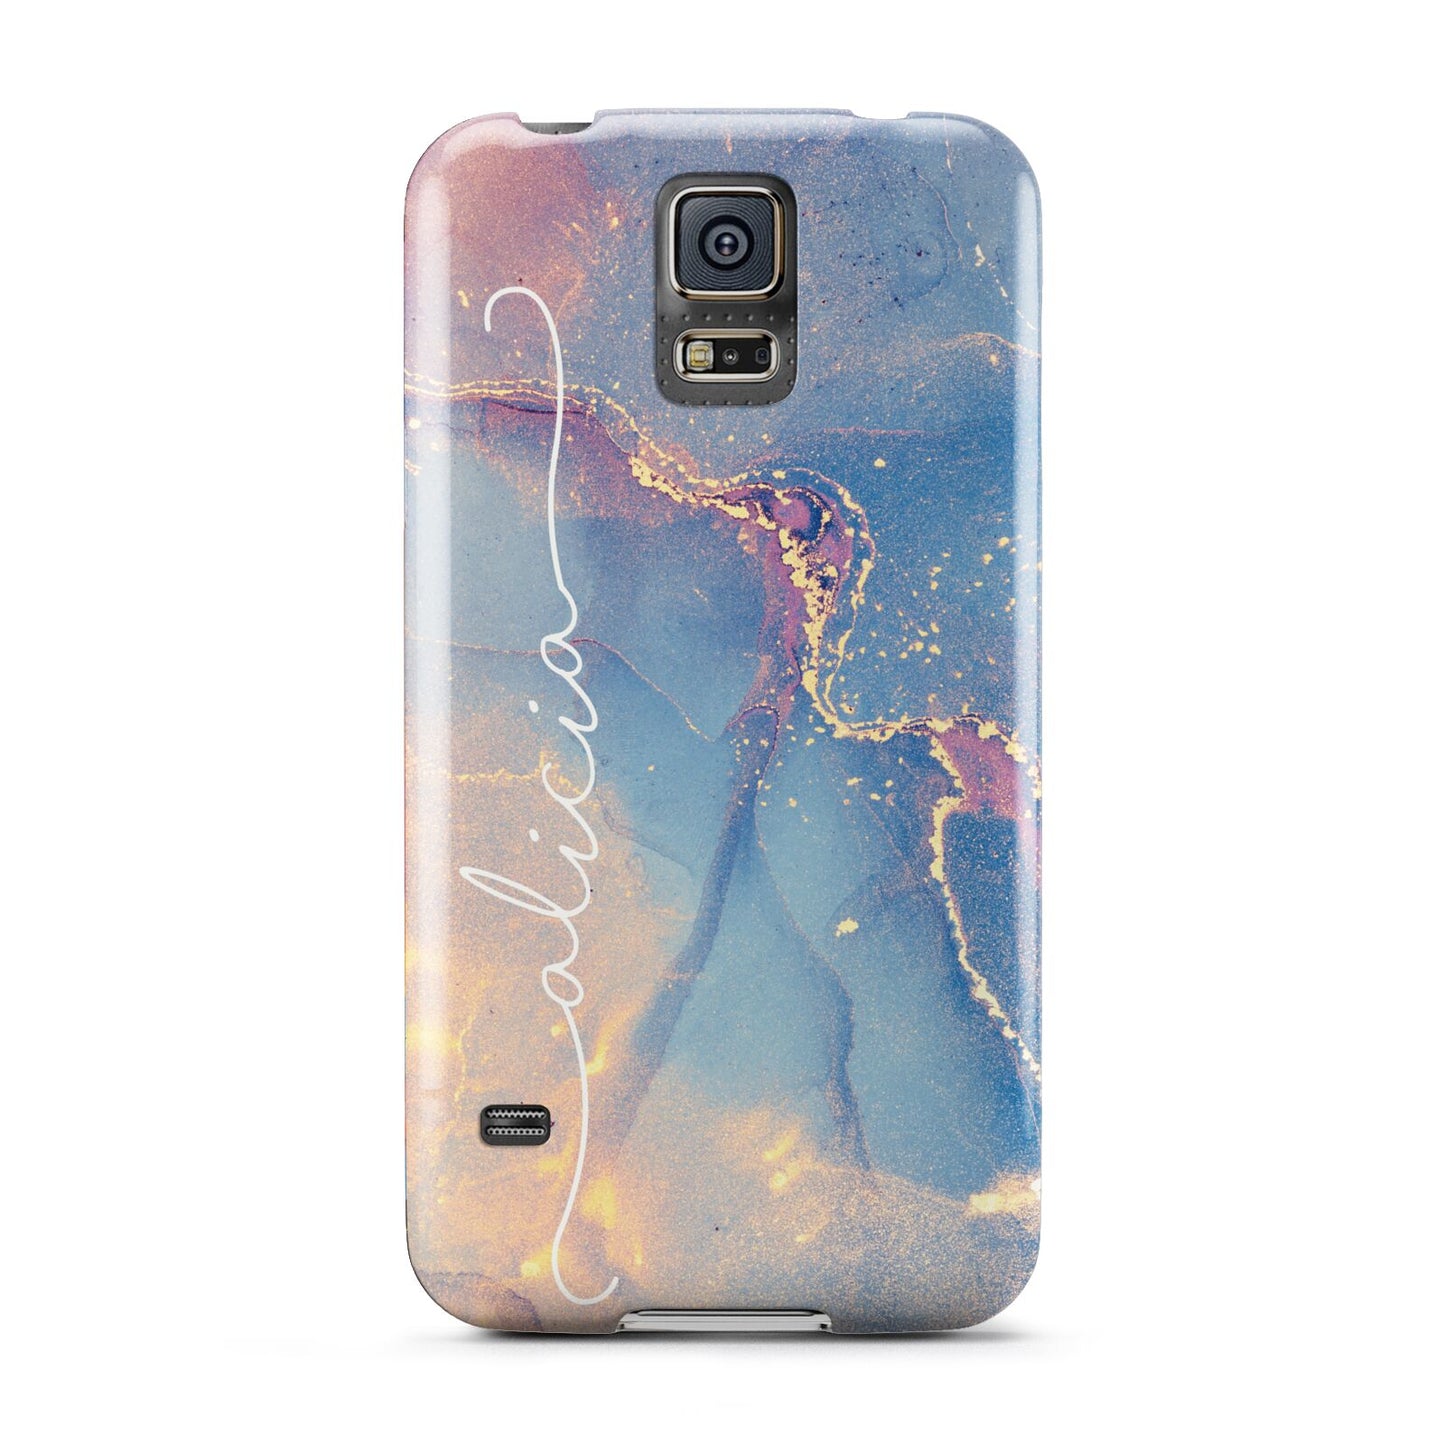 Blue and Pink Marble Samsung Galaxy S5 Case